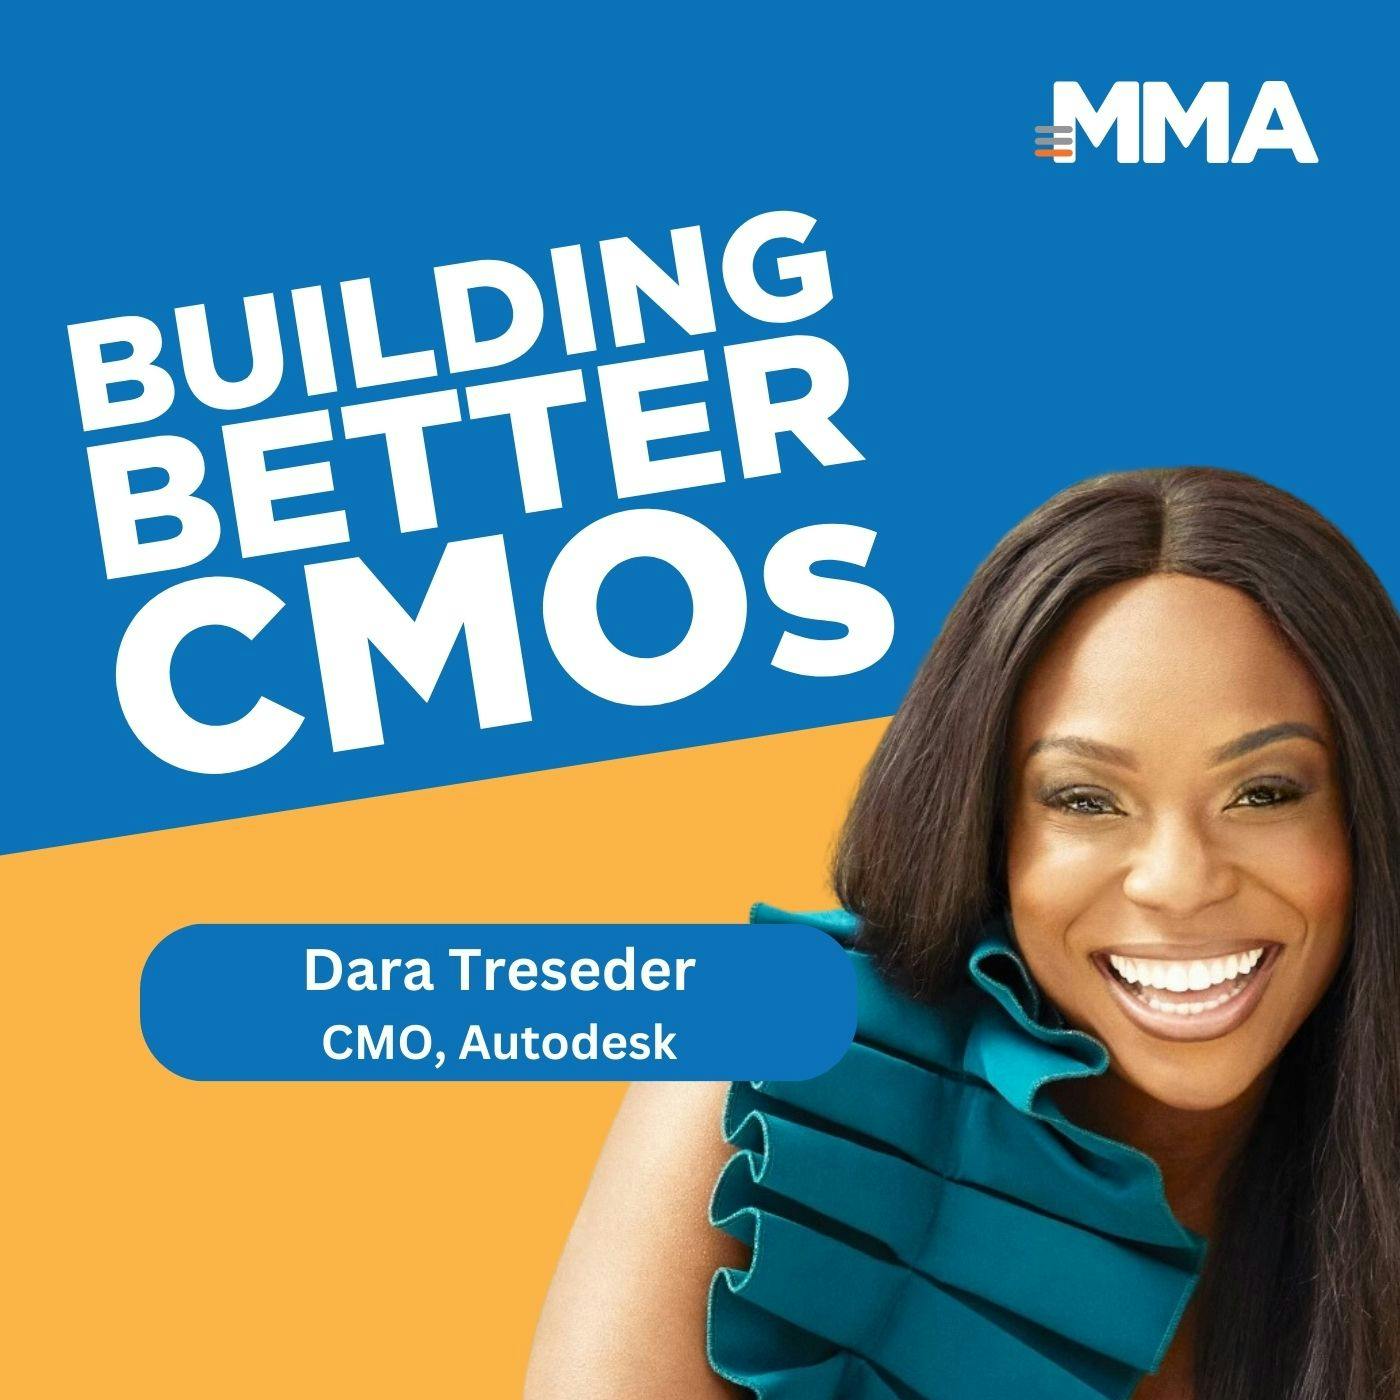 Dara Treseder, CMO of Autodesk: Invest in Yourself